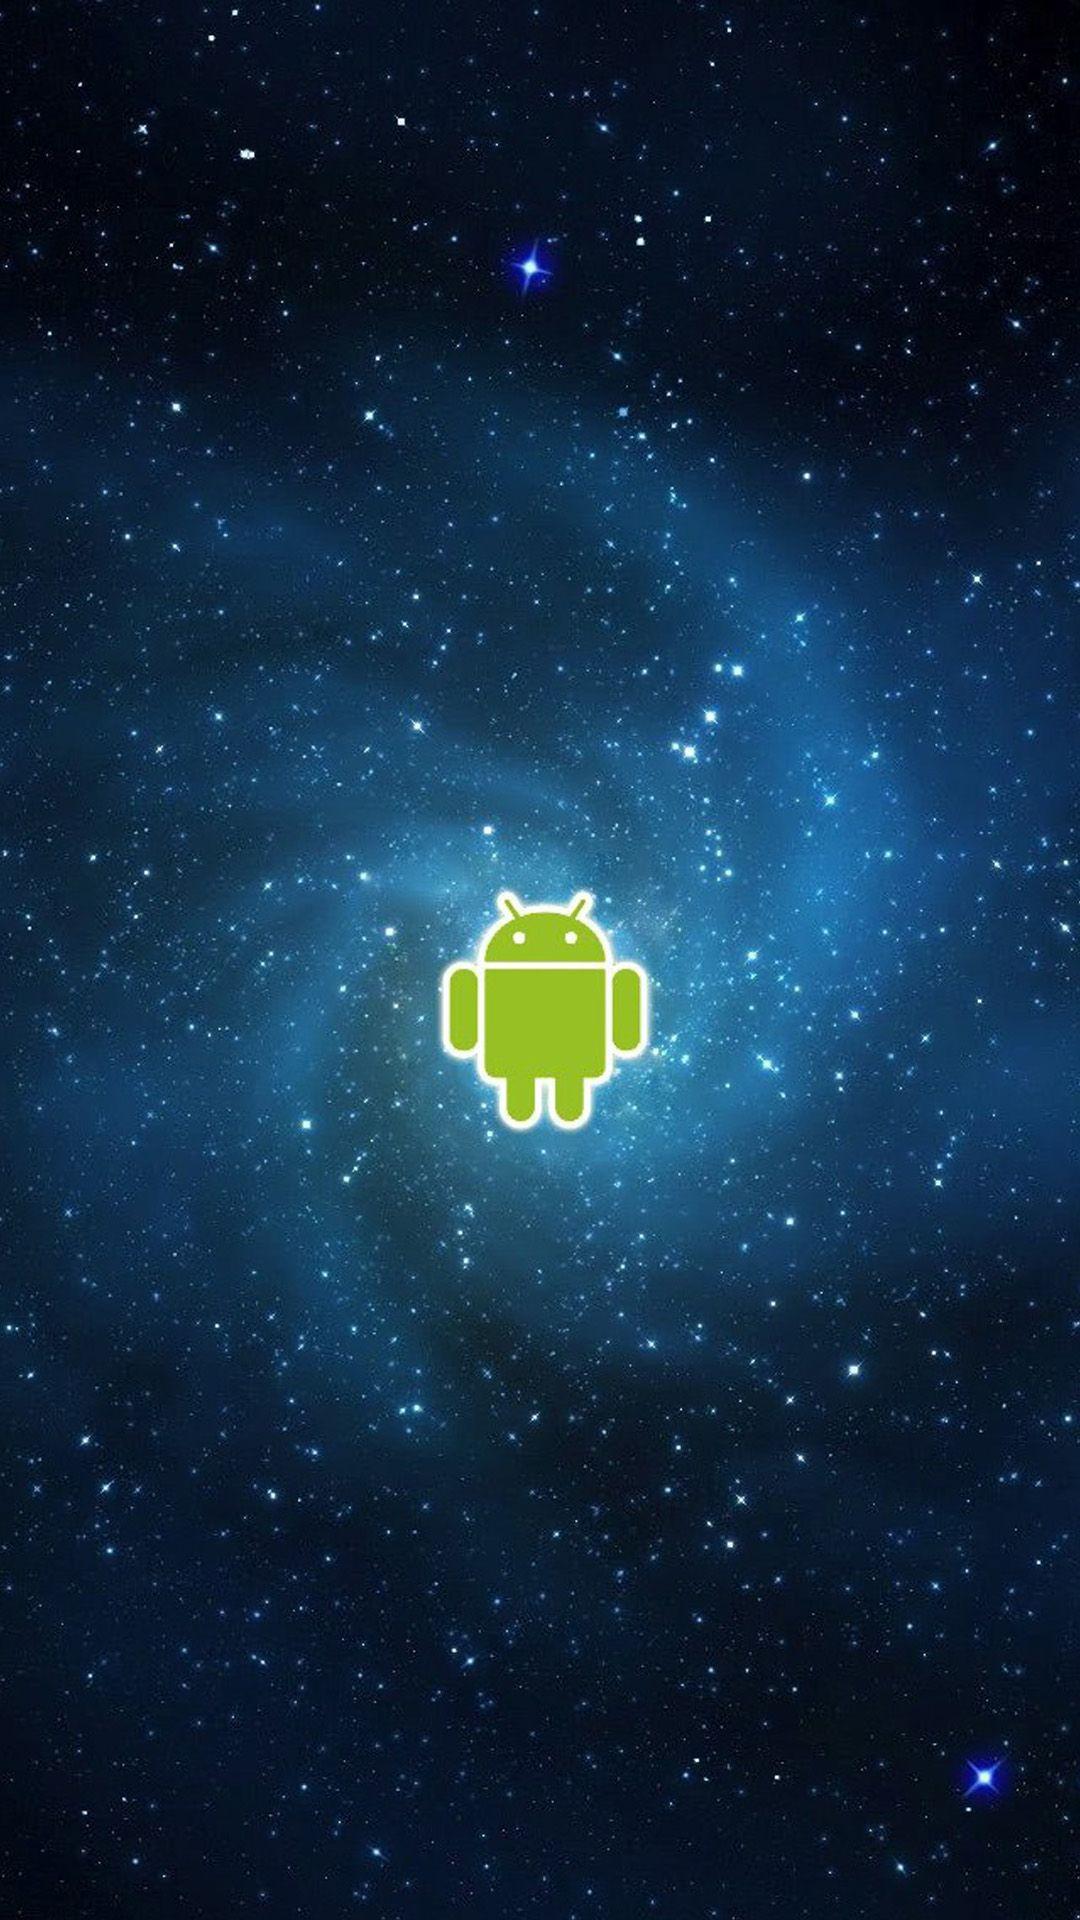 Android Logo Galaxy Universe Android Wallpaper free download